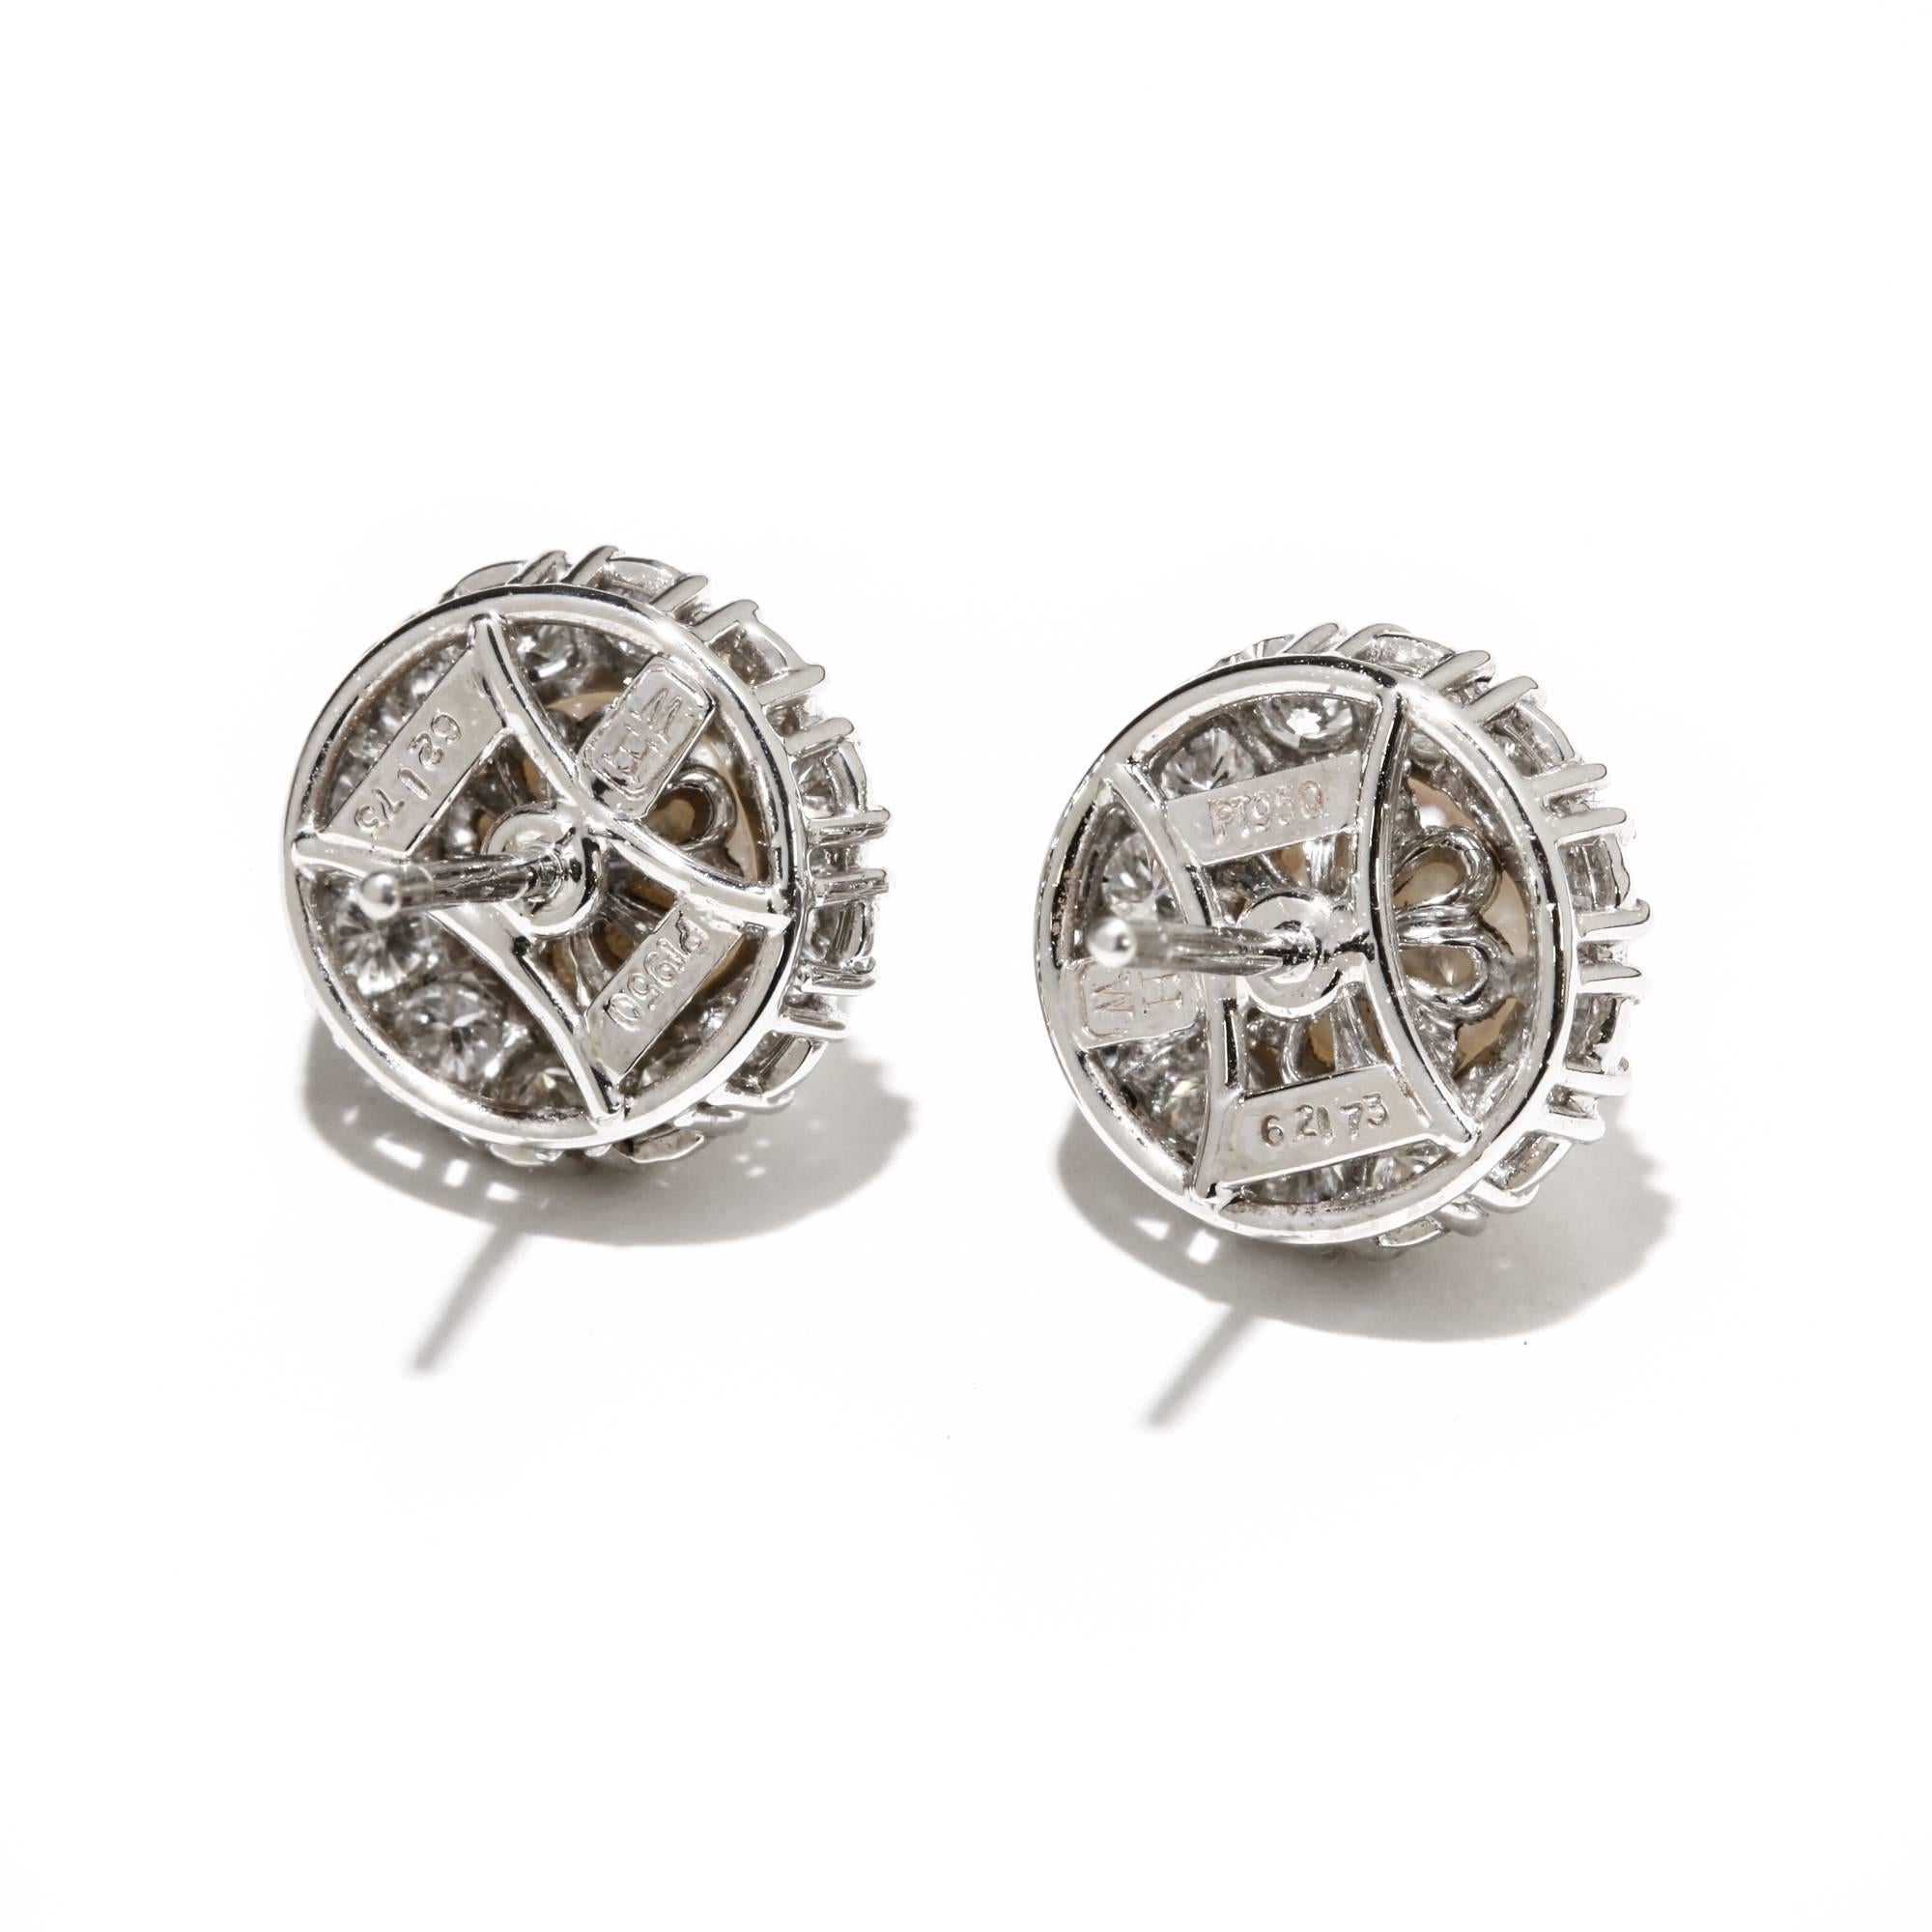 These Harry Winston Akoya pearl and diamond earrings are set in platinum. The earring backs are 18k white gold. The pearls measure 6mm and the total weight of the diamonds is 0.73 ct. Each earring including the diamonds has a diameter of 11mm. The